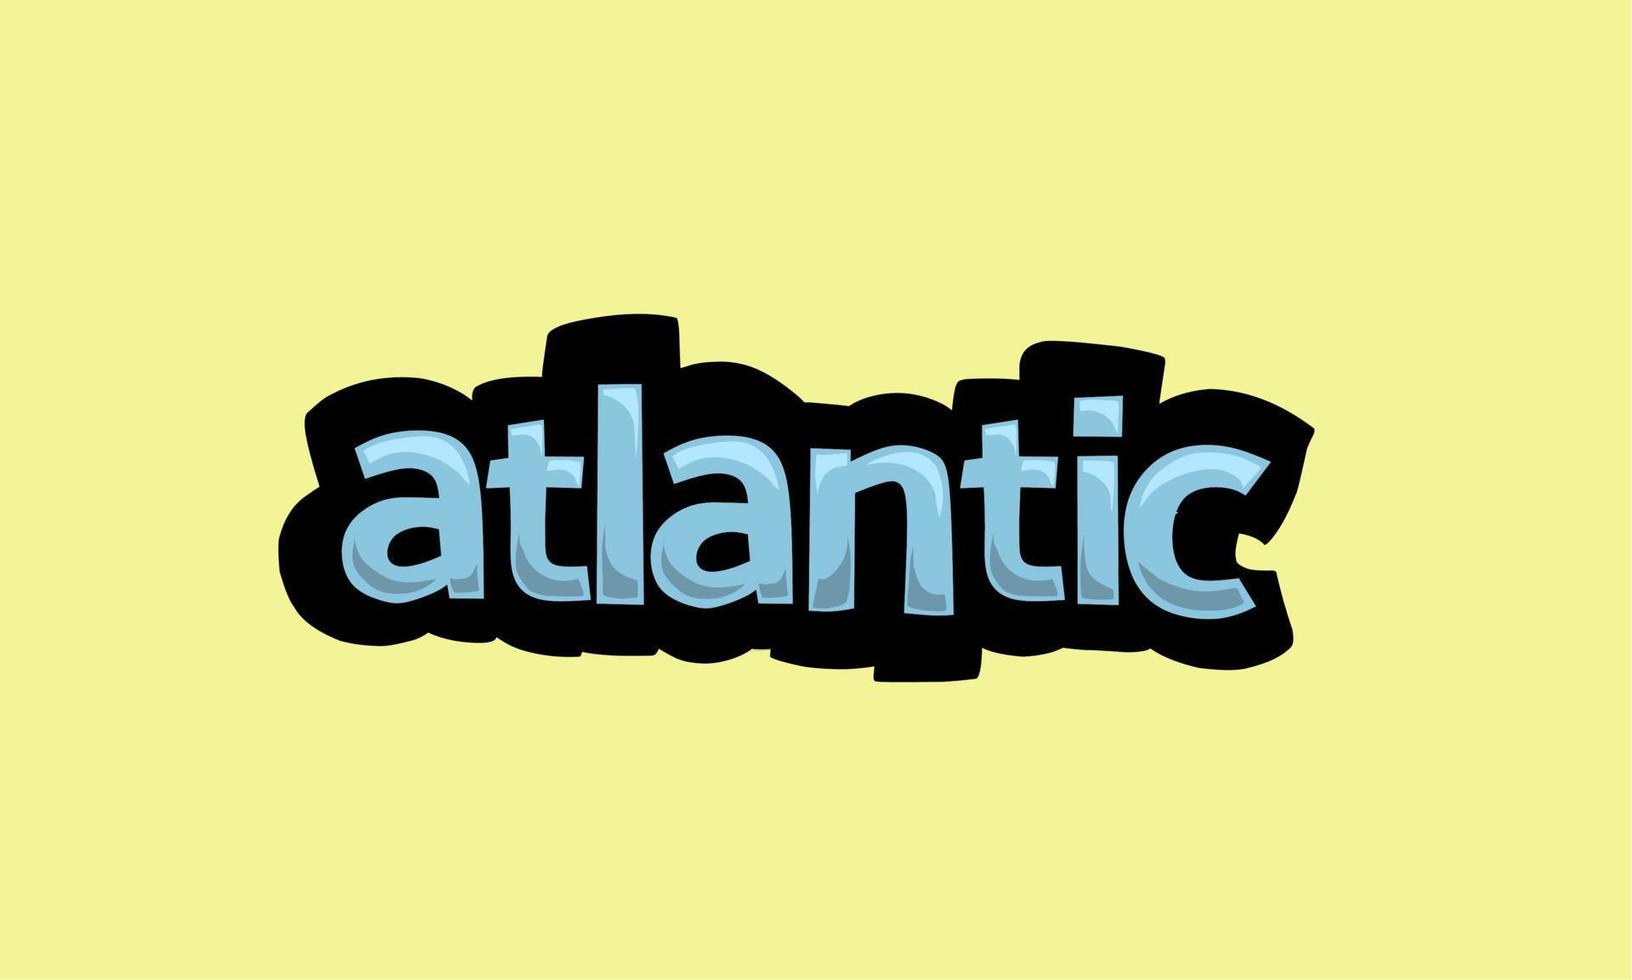 ATLANTIC writing vector design on a yellow background